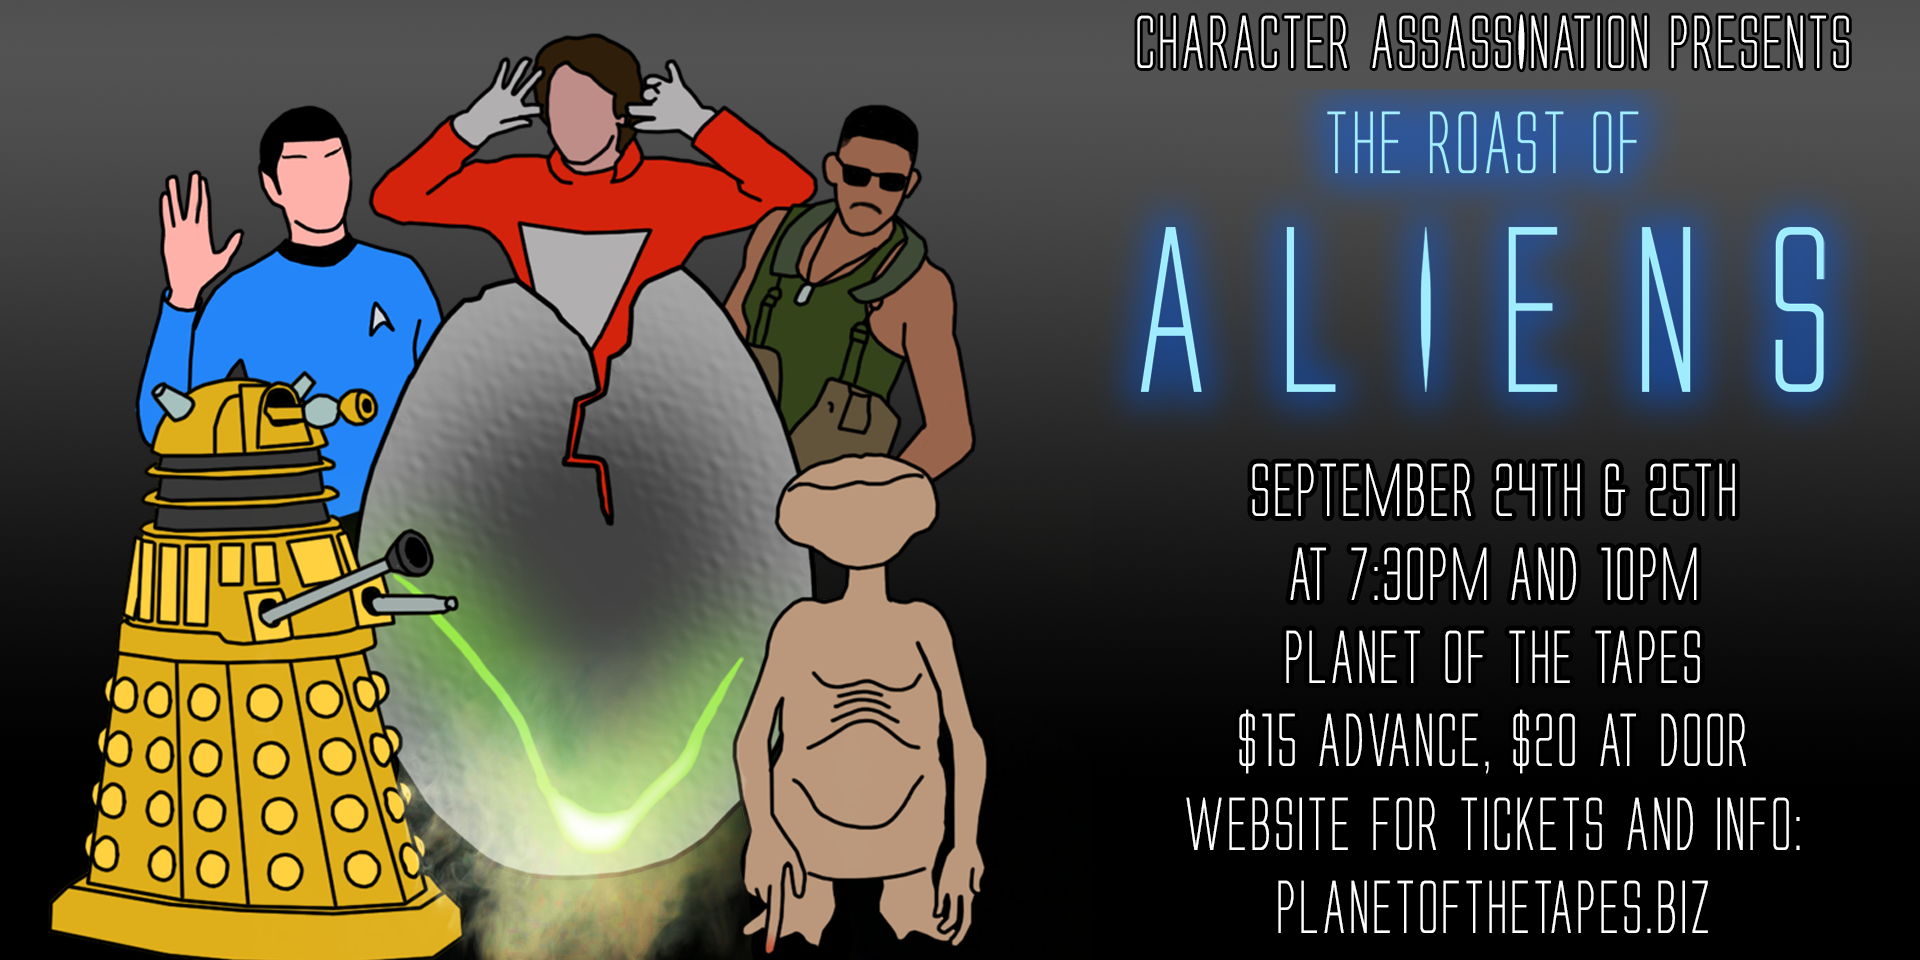 Character Assassination presents: The Roast of Aliens!  promotional image